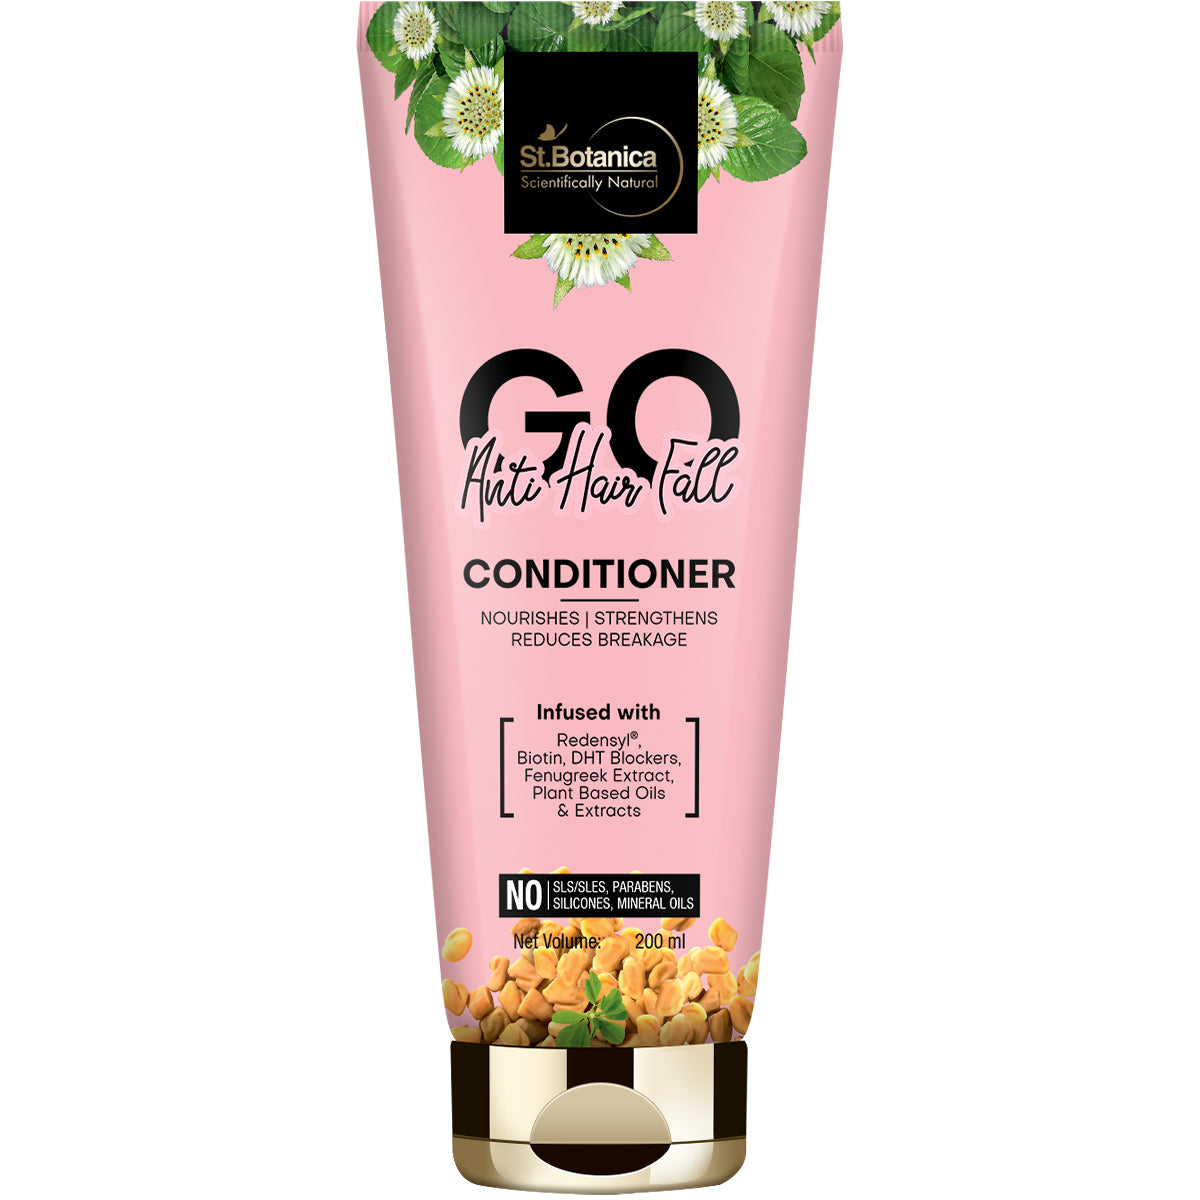 St.Botanica Go Anti-Hair Fall Hair Conditioner - With Redensyl, Biotin, Natural Dht Blockers, No Sls/ Sulphate, Paraben, Silicones, Colors, 200 ml